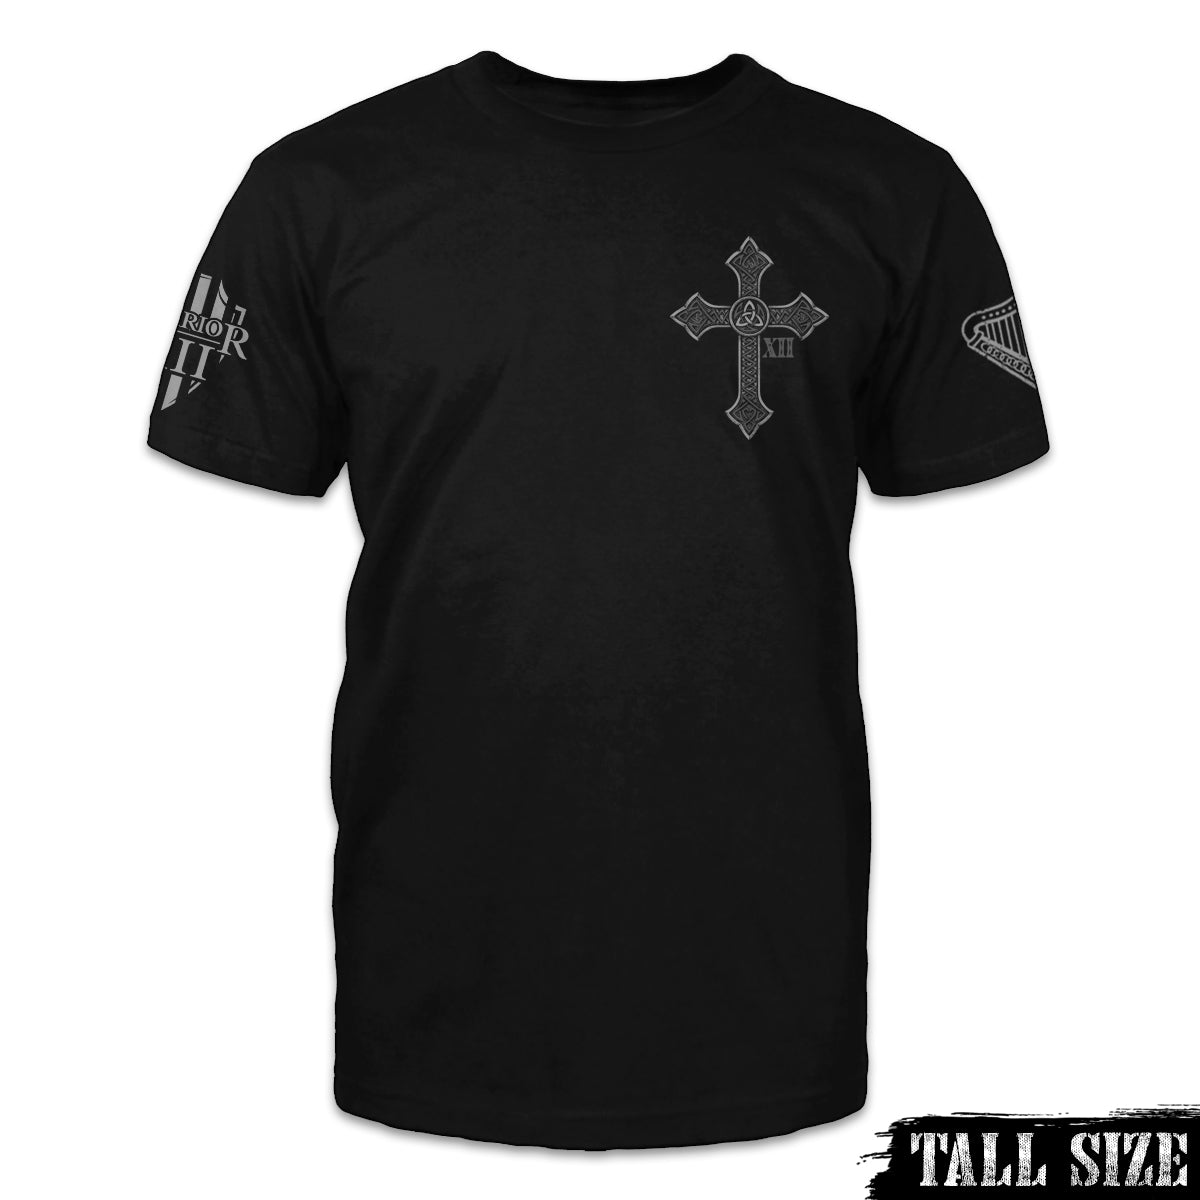 A black tall size shirt with across printed on the front of the shirt.